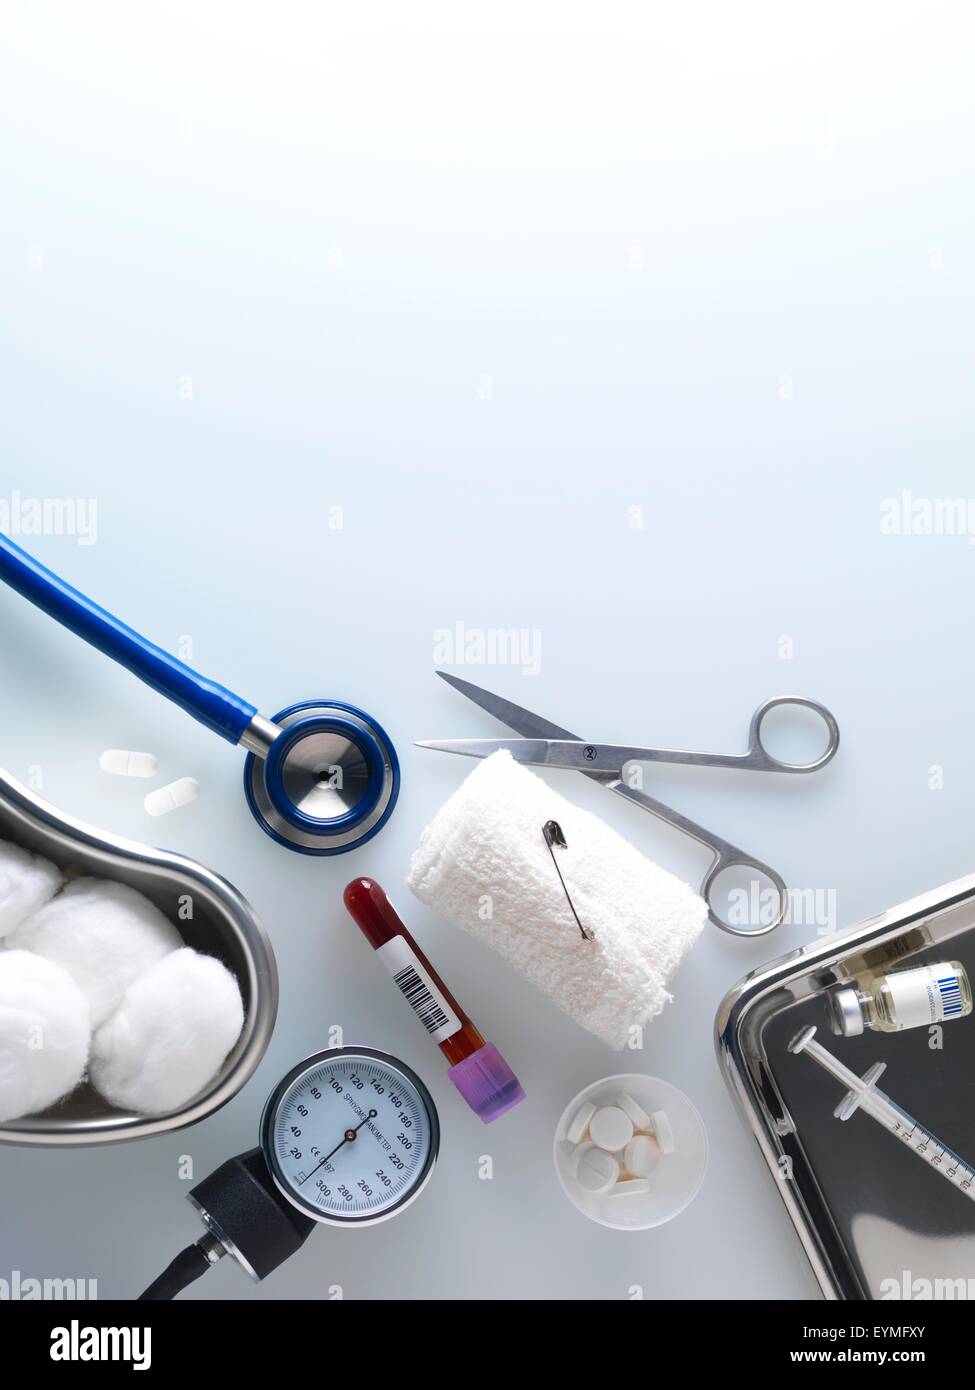 An assortment of medical equipment and consumables Stock Photo